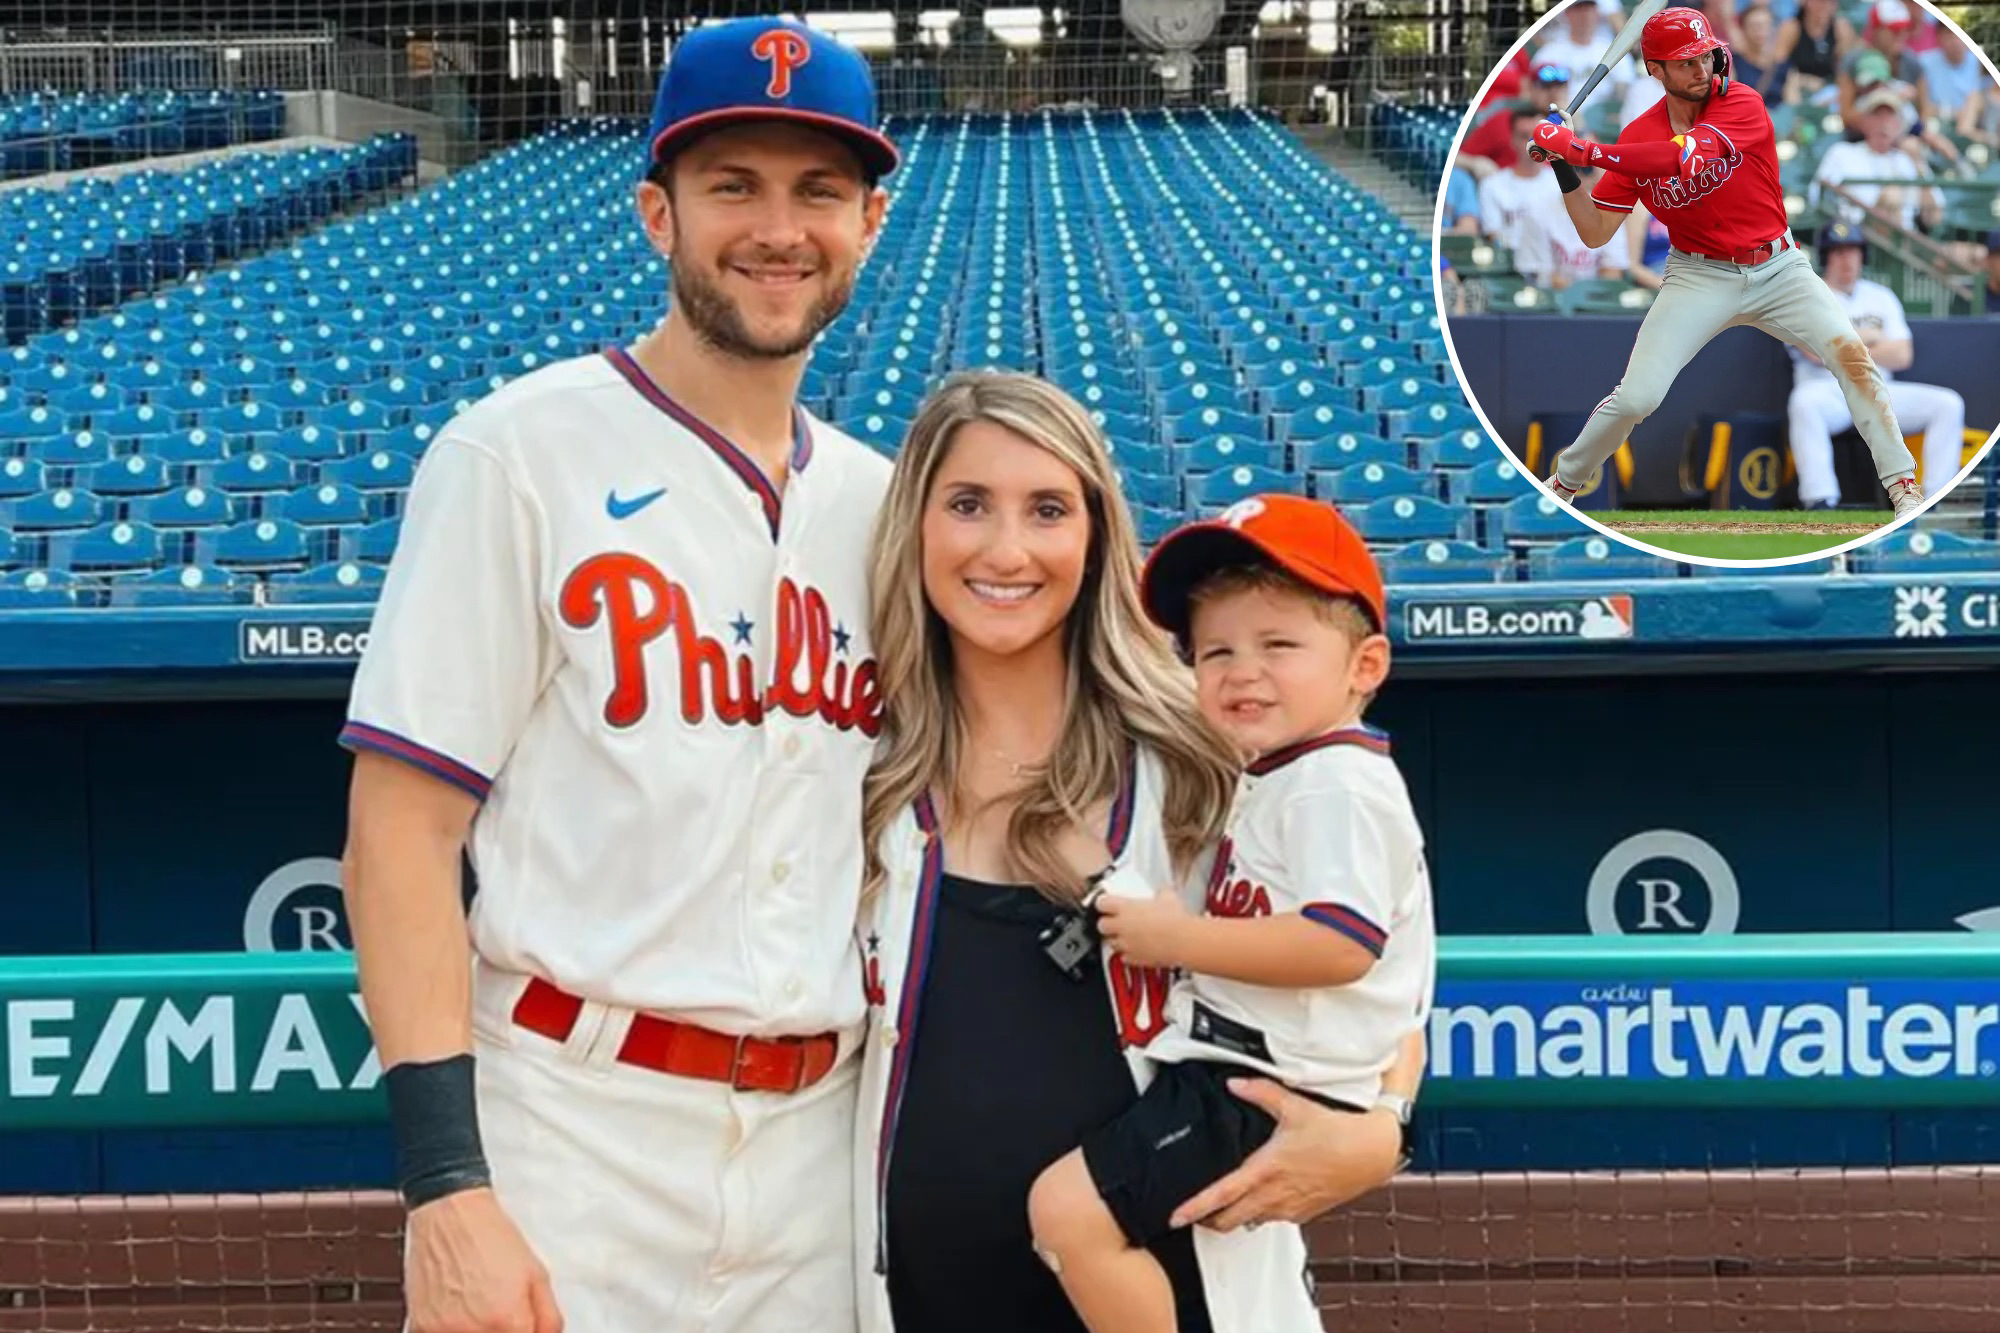 Who Is Trea Turner's Wife? All About Kristen Turner